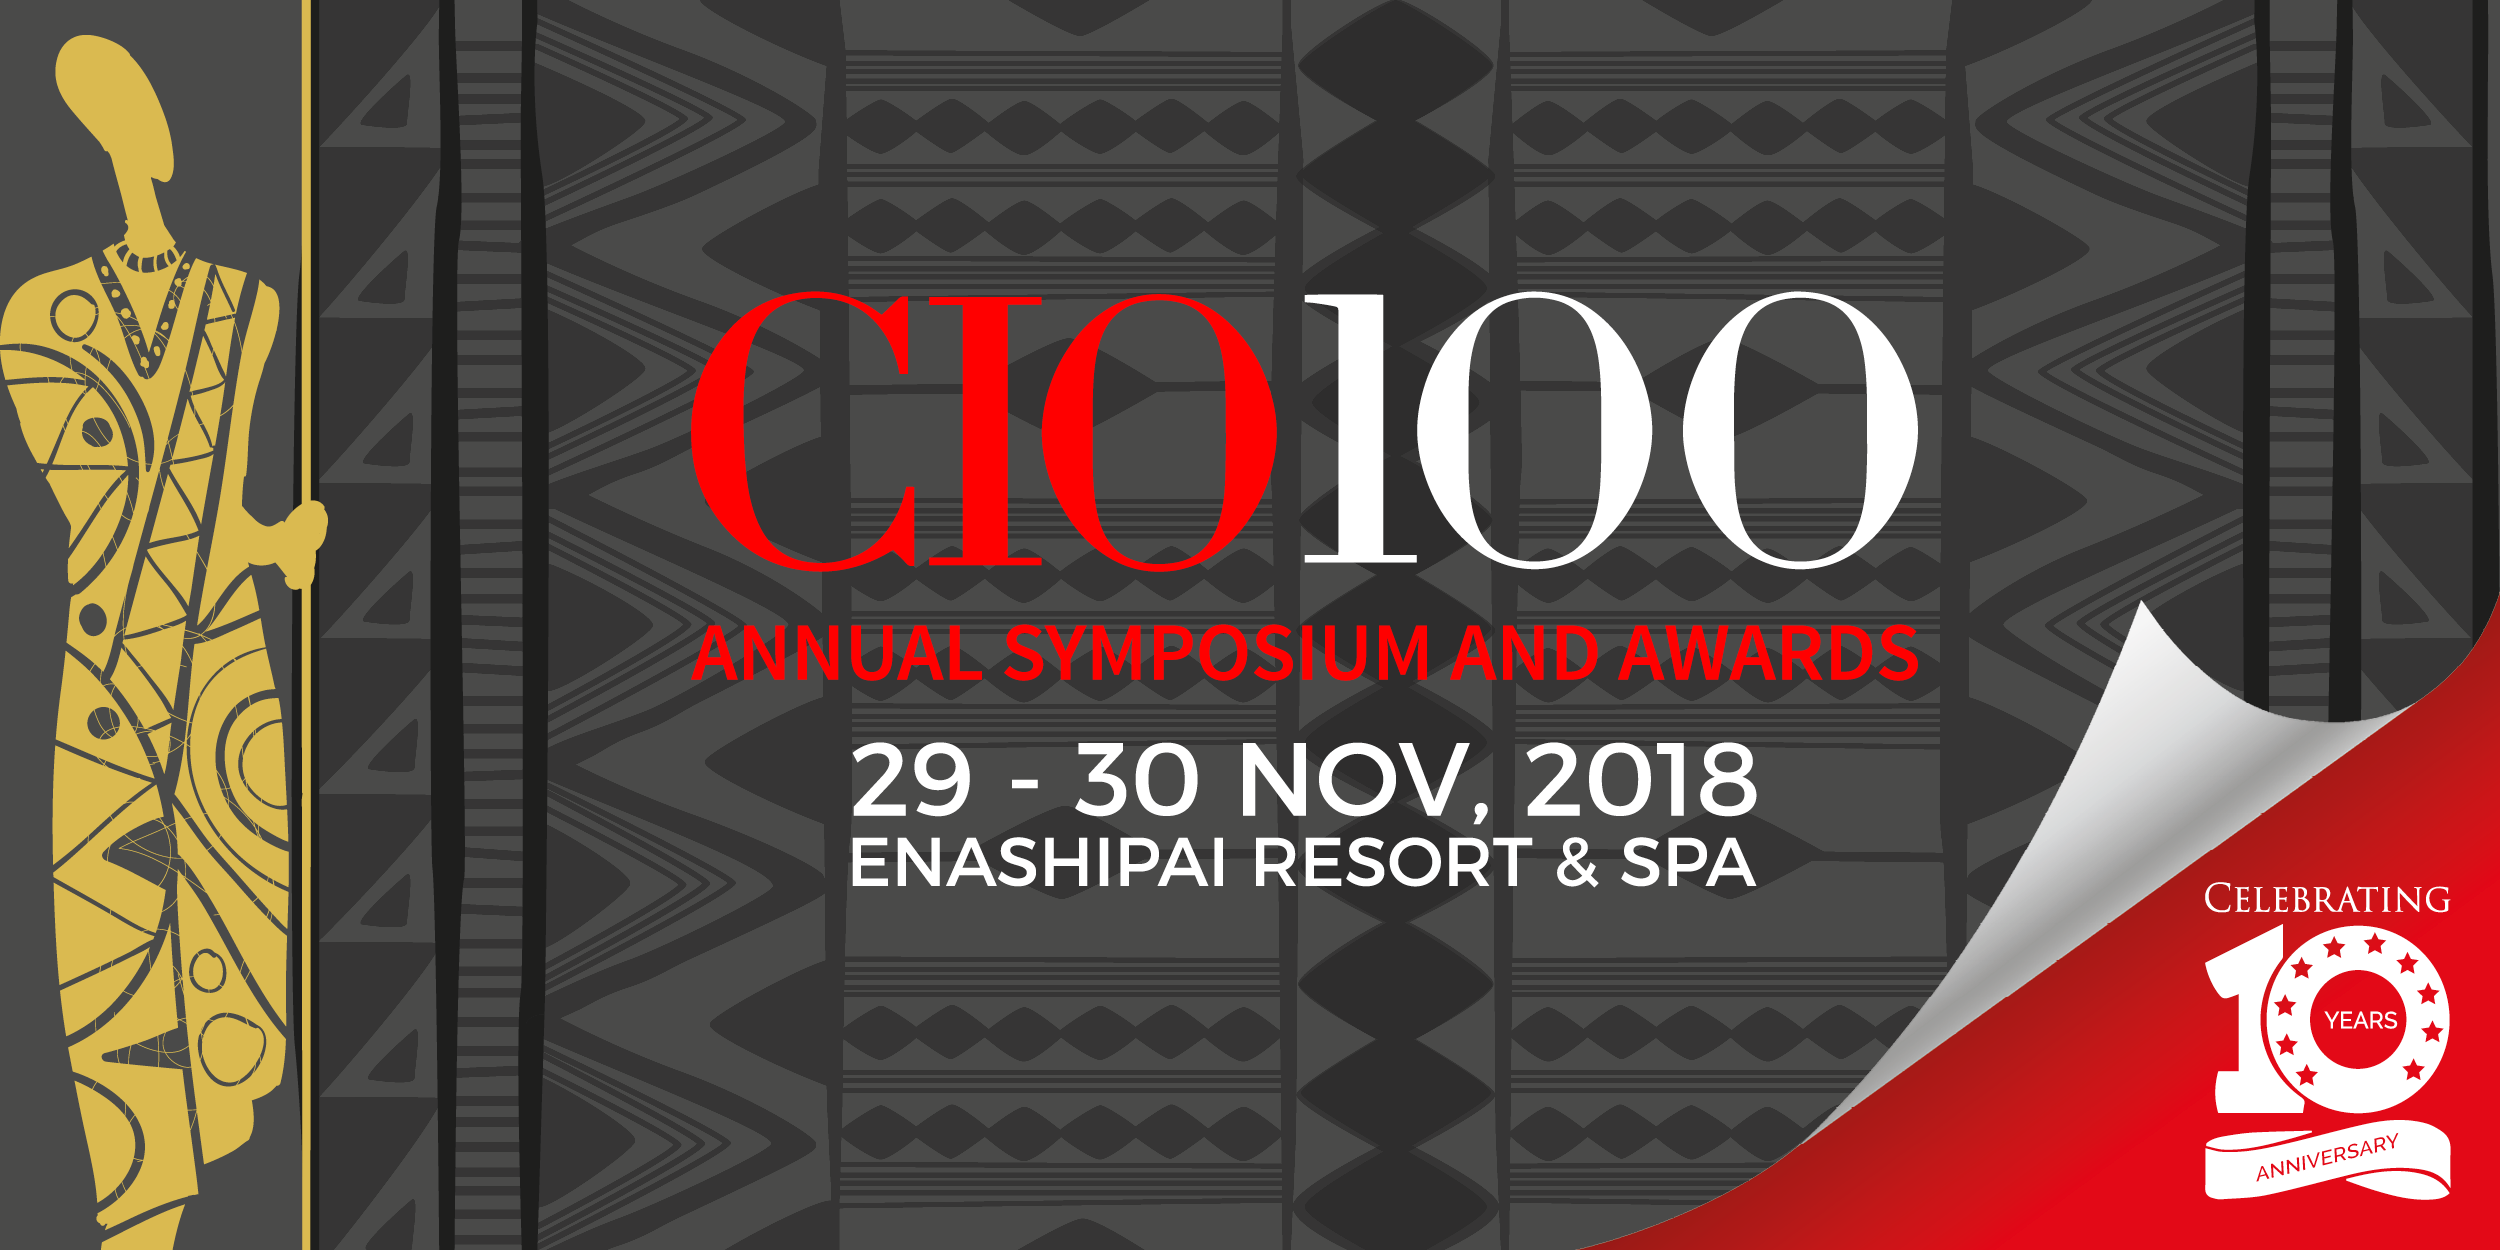 The CIO 100 Symposium and Awards agenda is finally out